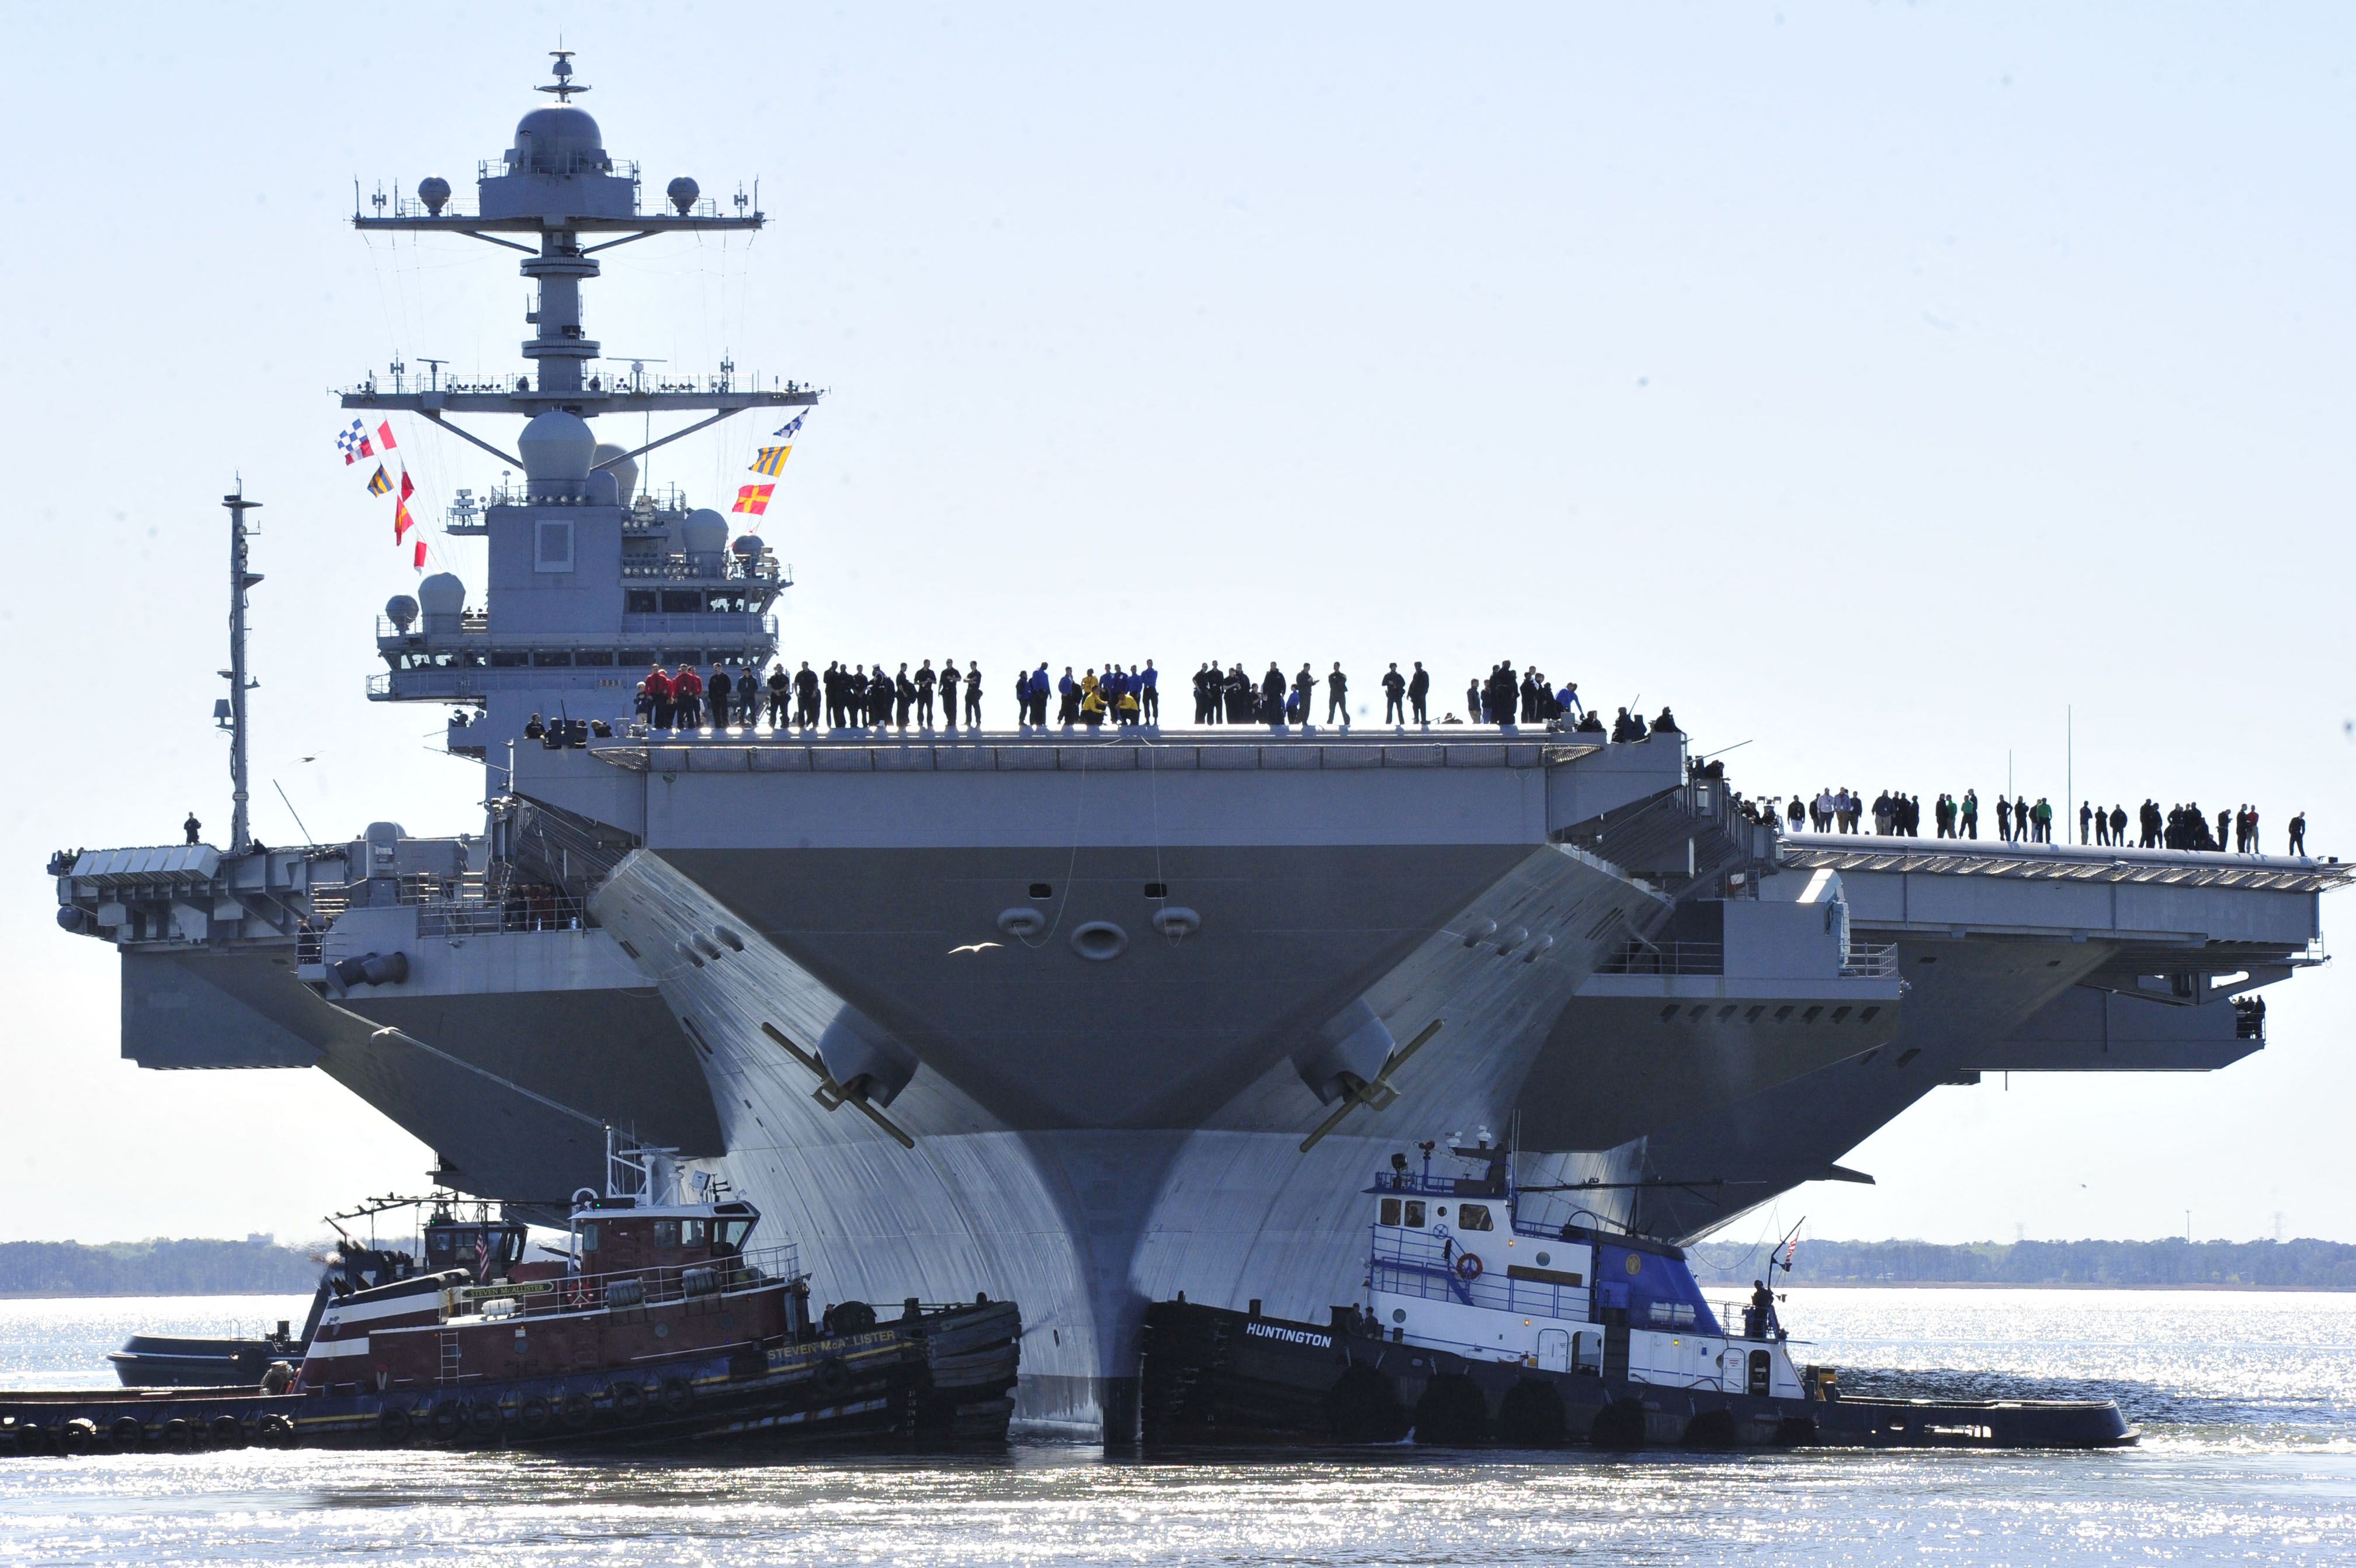 The aircraft carrier Gerald R. Ford (CVN 78) in an image from April 8, 2017. (Photo by MCC Christopher Delano/US NAVY/AFP).